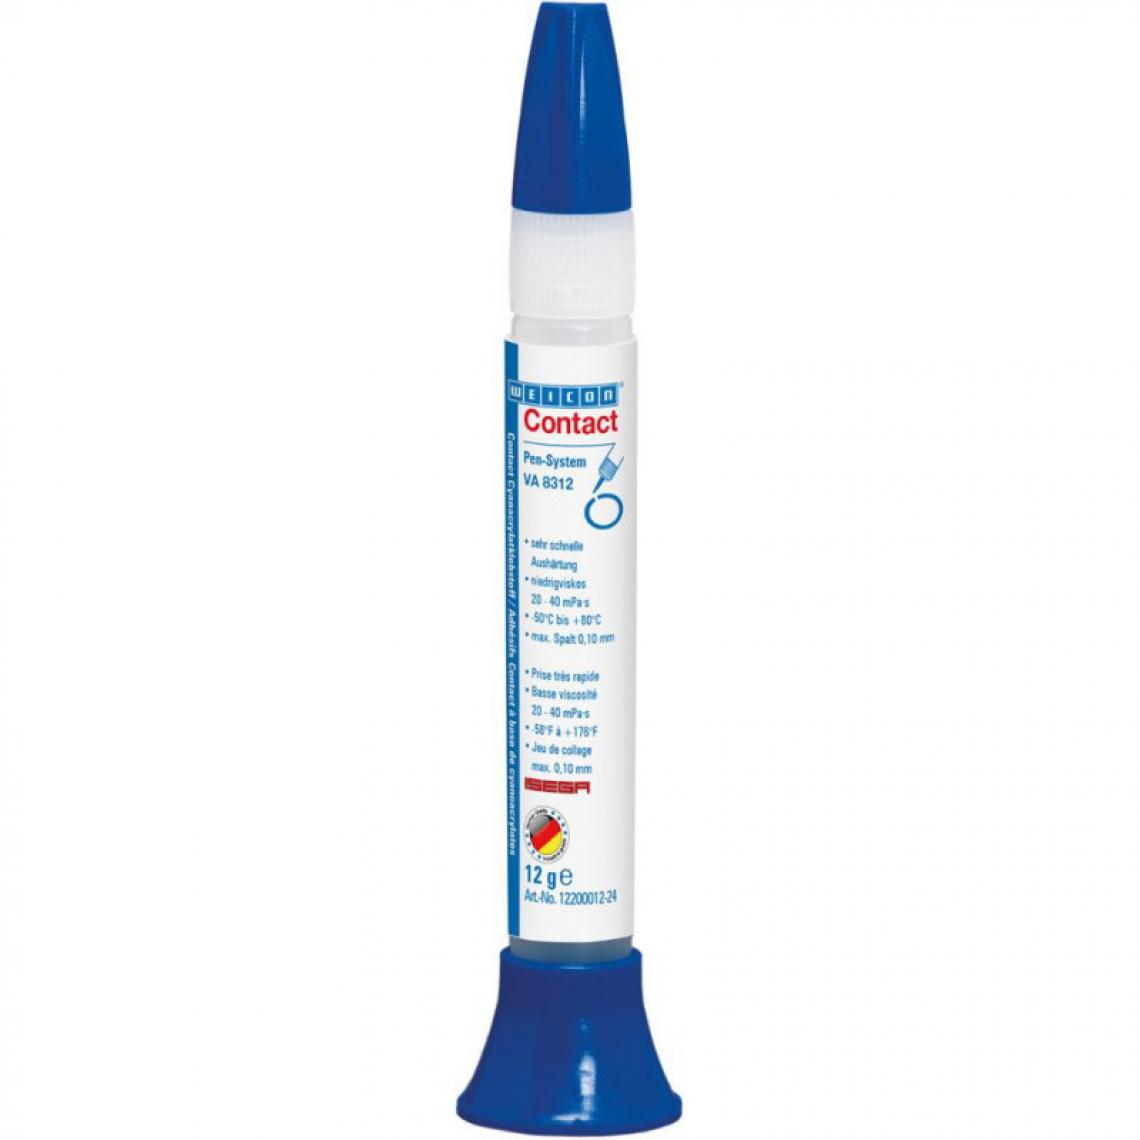 marque generique - Colle cyanoacrylate VA 8312 30 g Pen-System Weicon (Par 20) - Mastic, silicone, joint